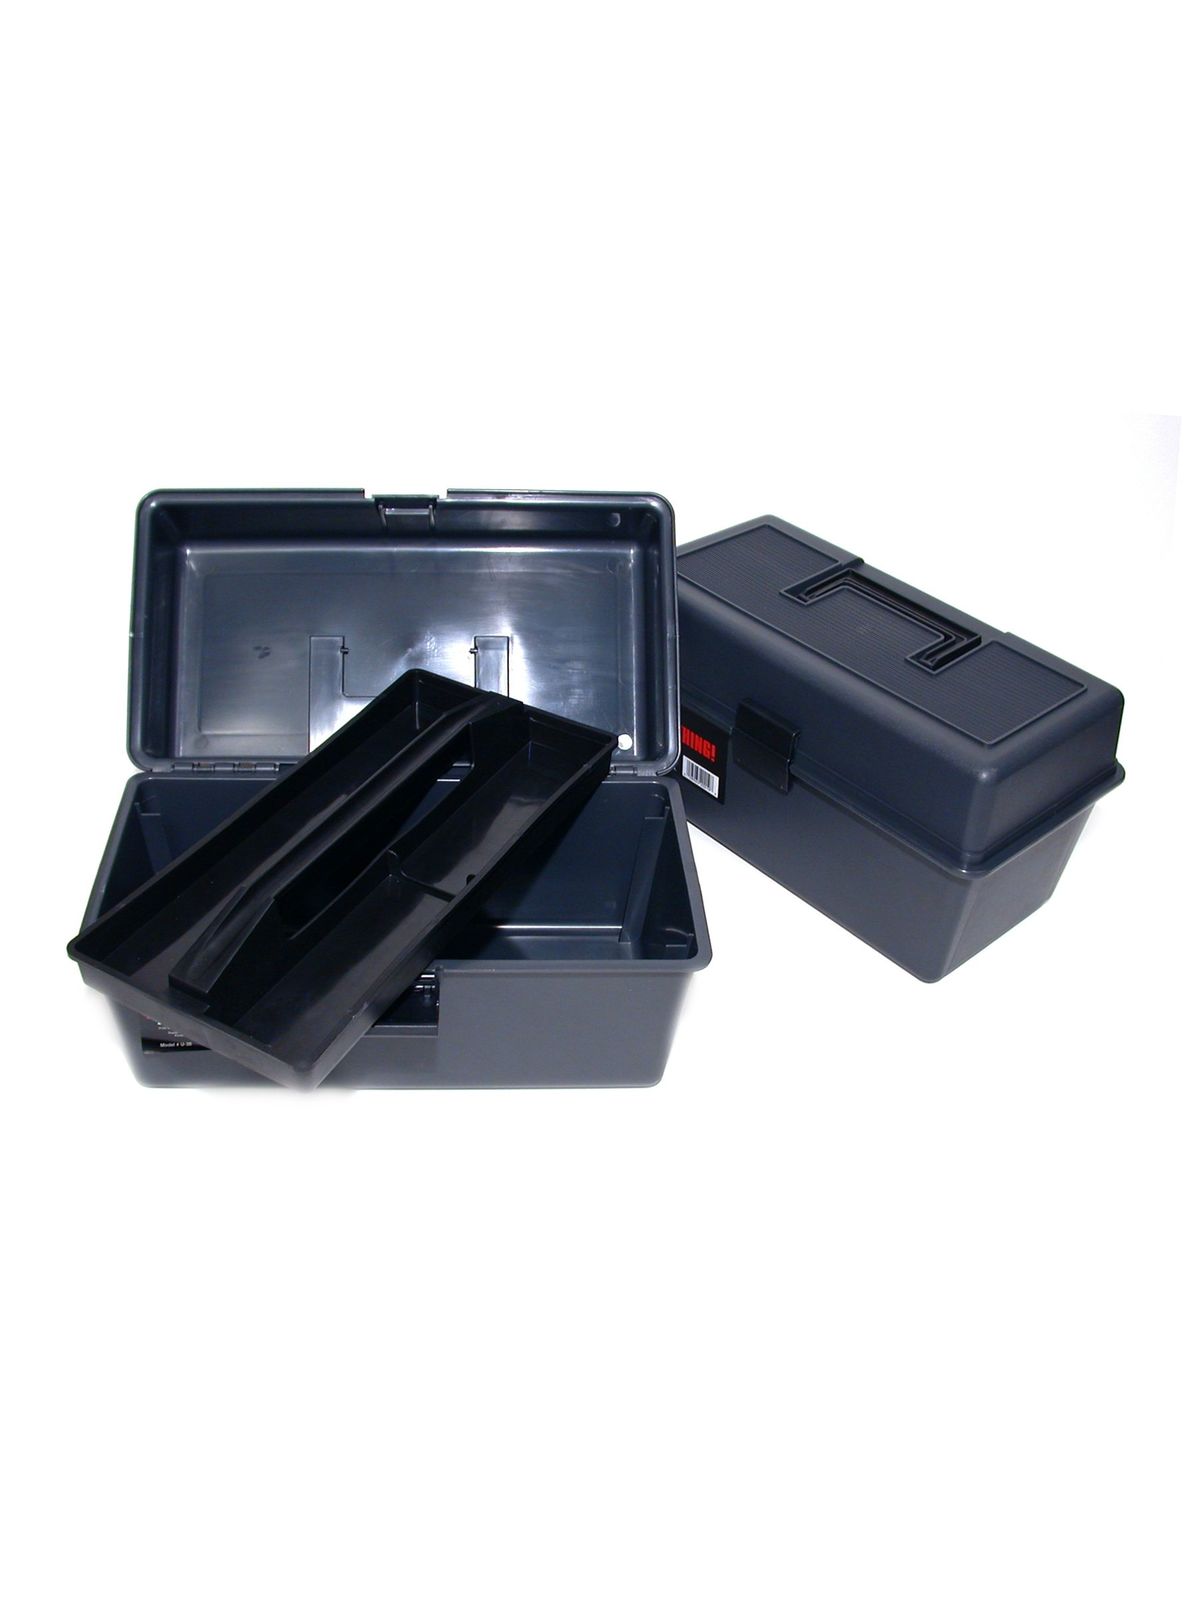 16 Inch Hi-cube Utility Box With Lift-out Tray Utility Box